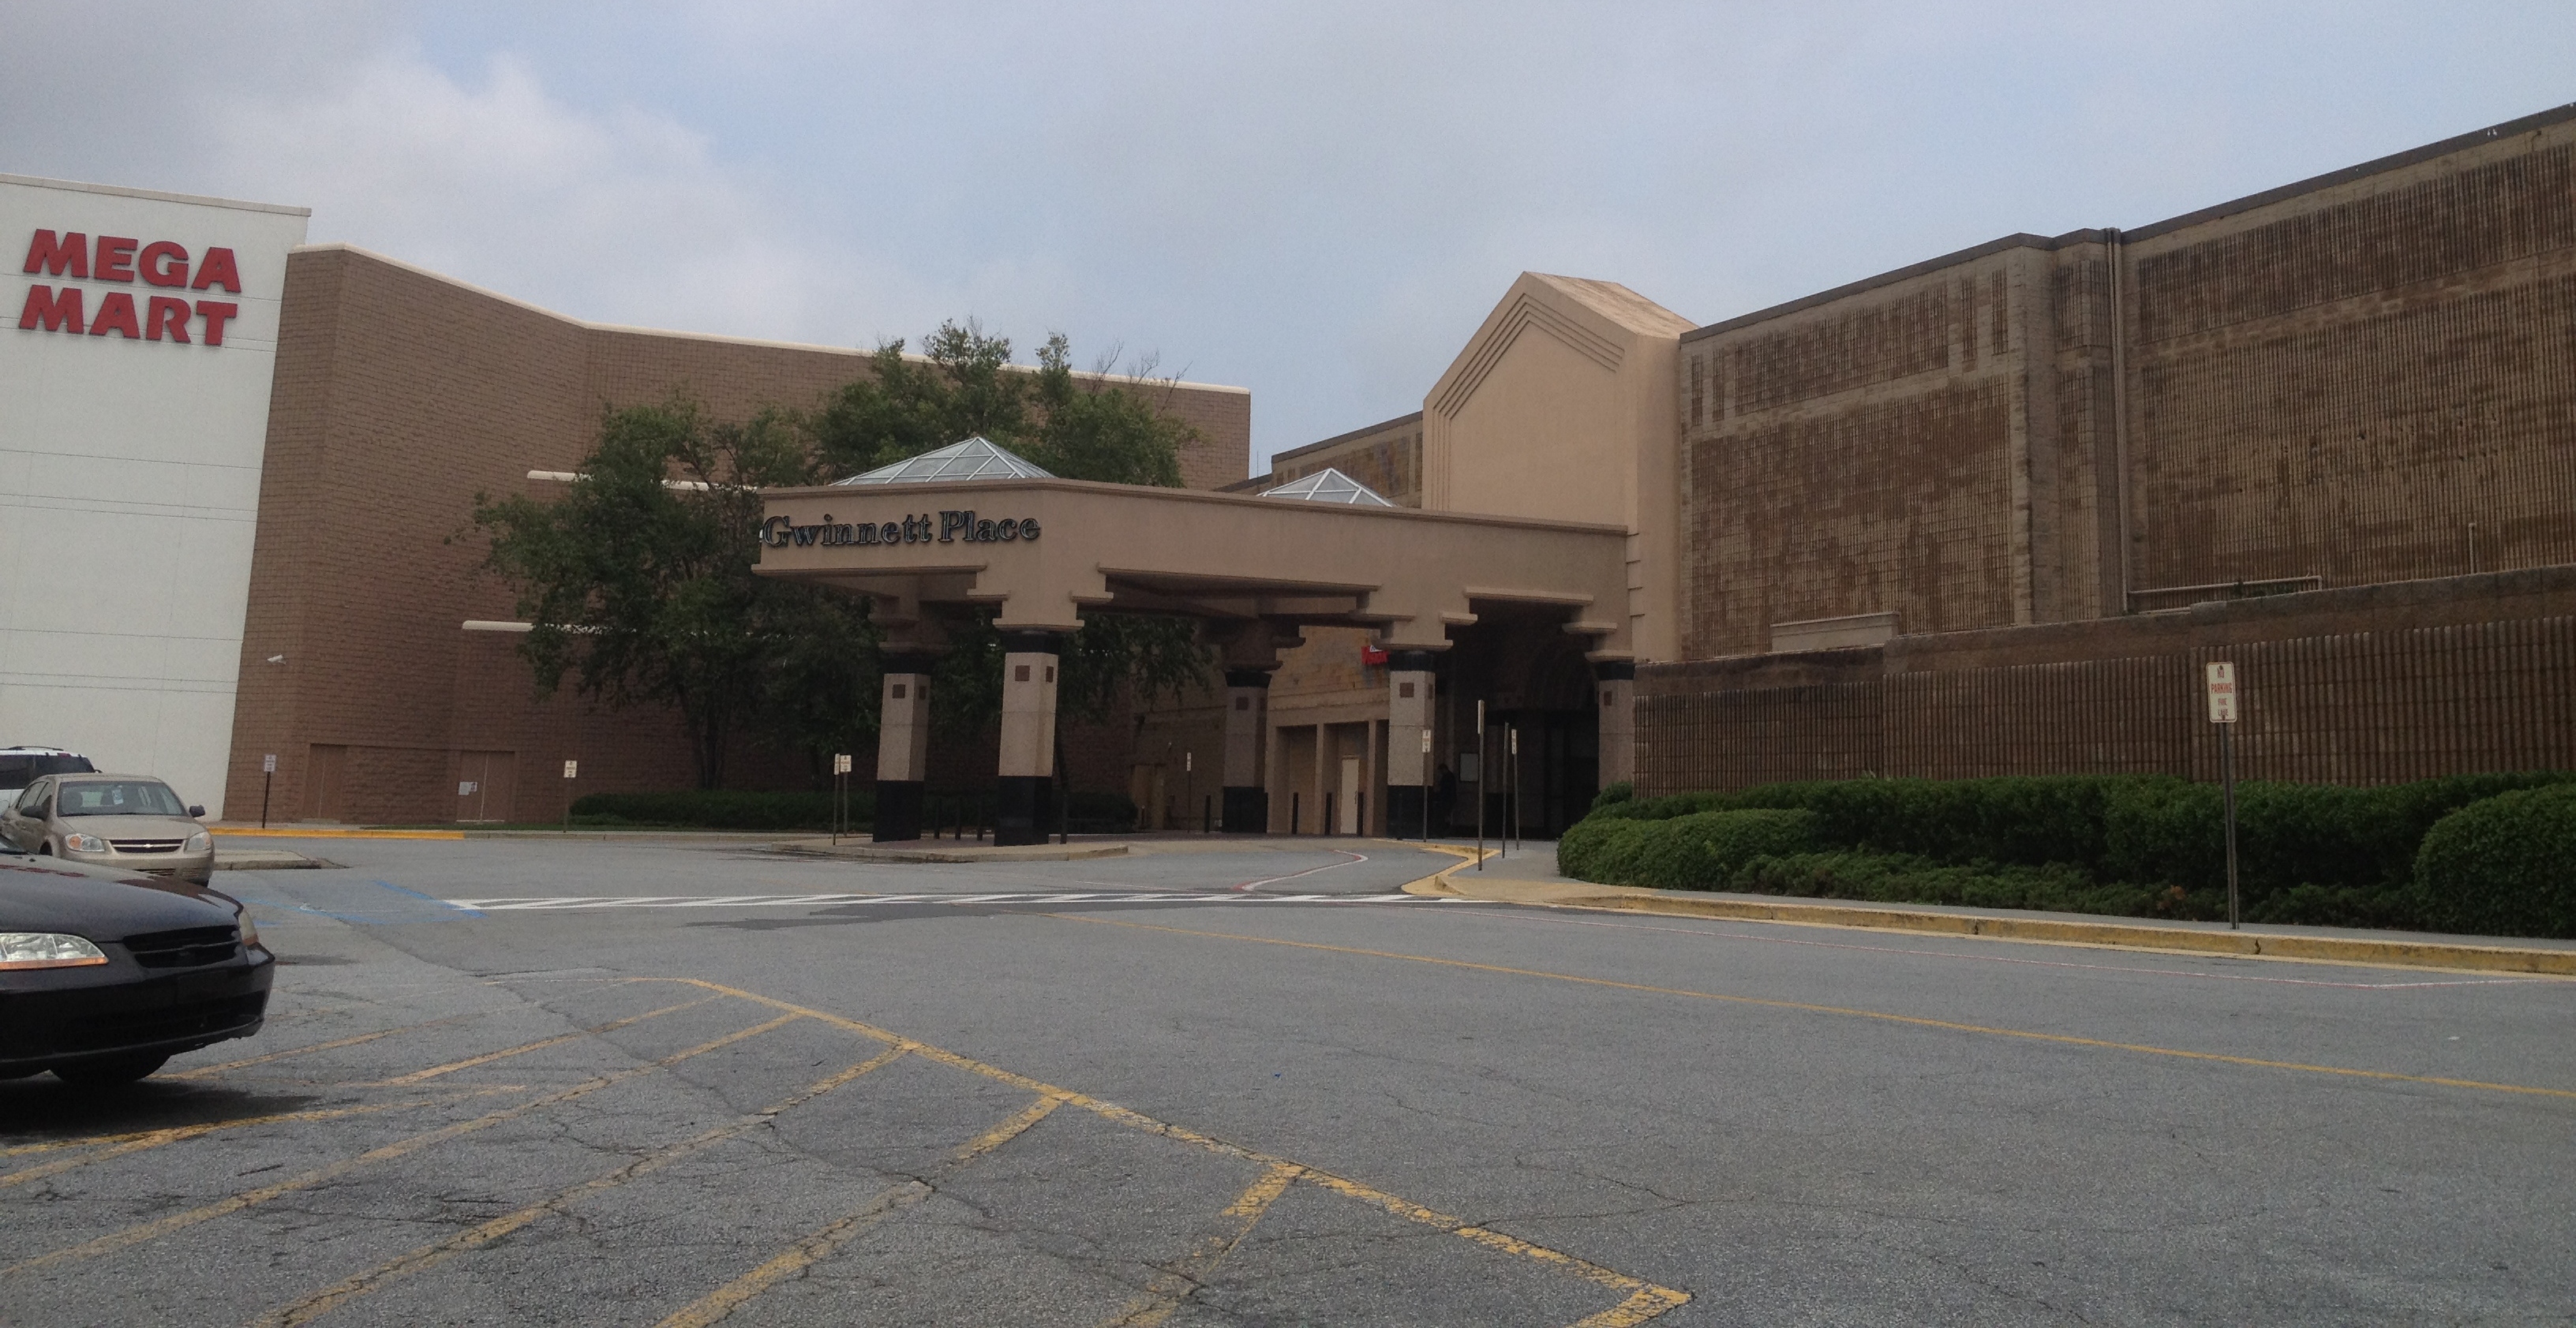 At deserted Georgia Square Mall, memories and speculation about